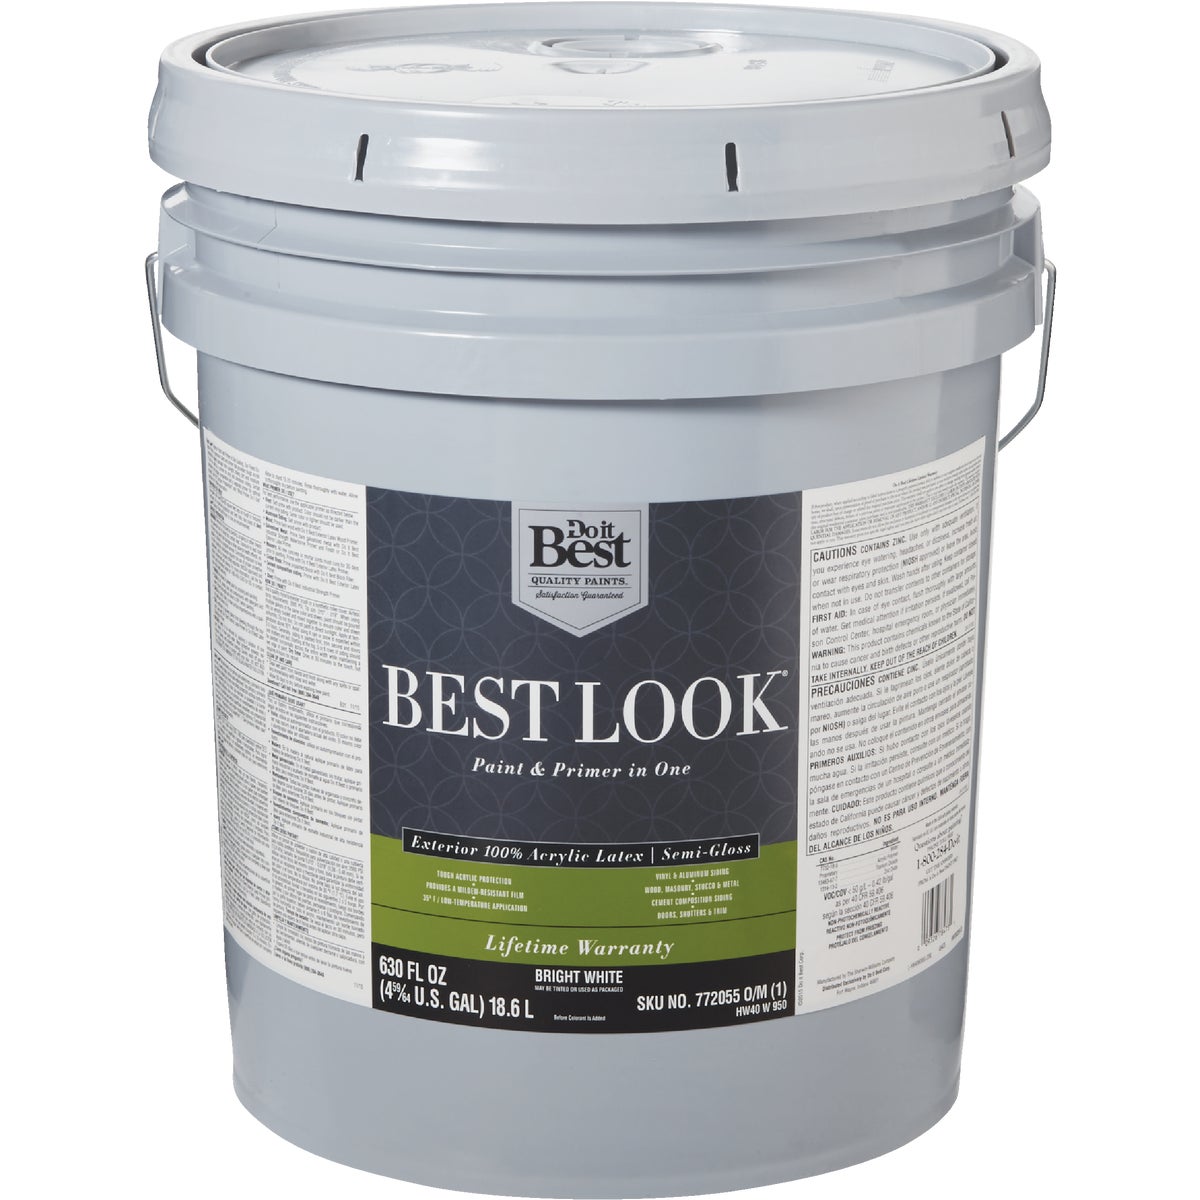 Best Look 100% Acrylic Latex Premium Paint & Primer In One Semi-Gloss Exterior House Paint, Bright White, 5 Gal.